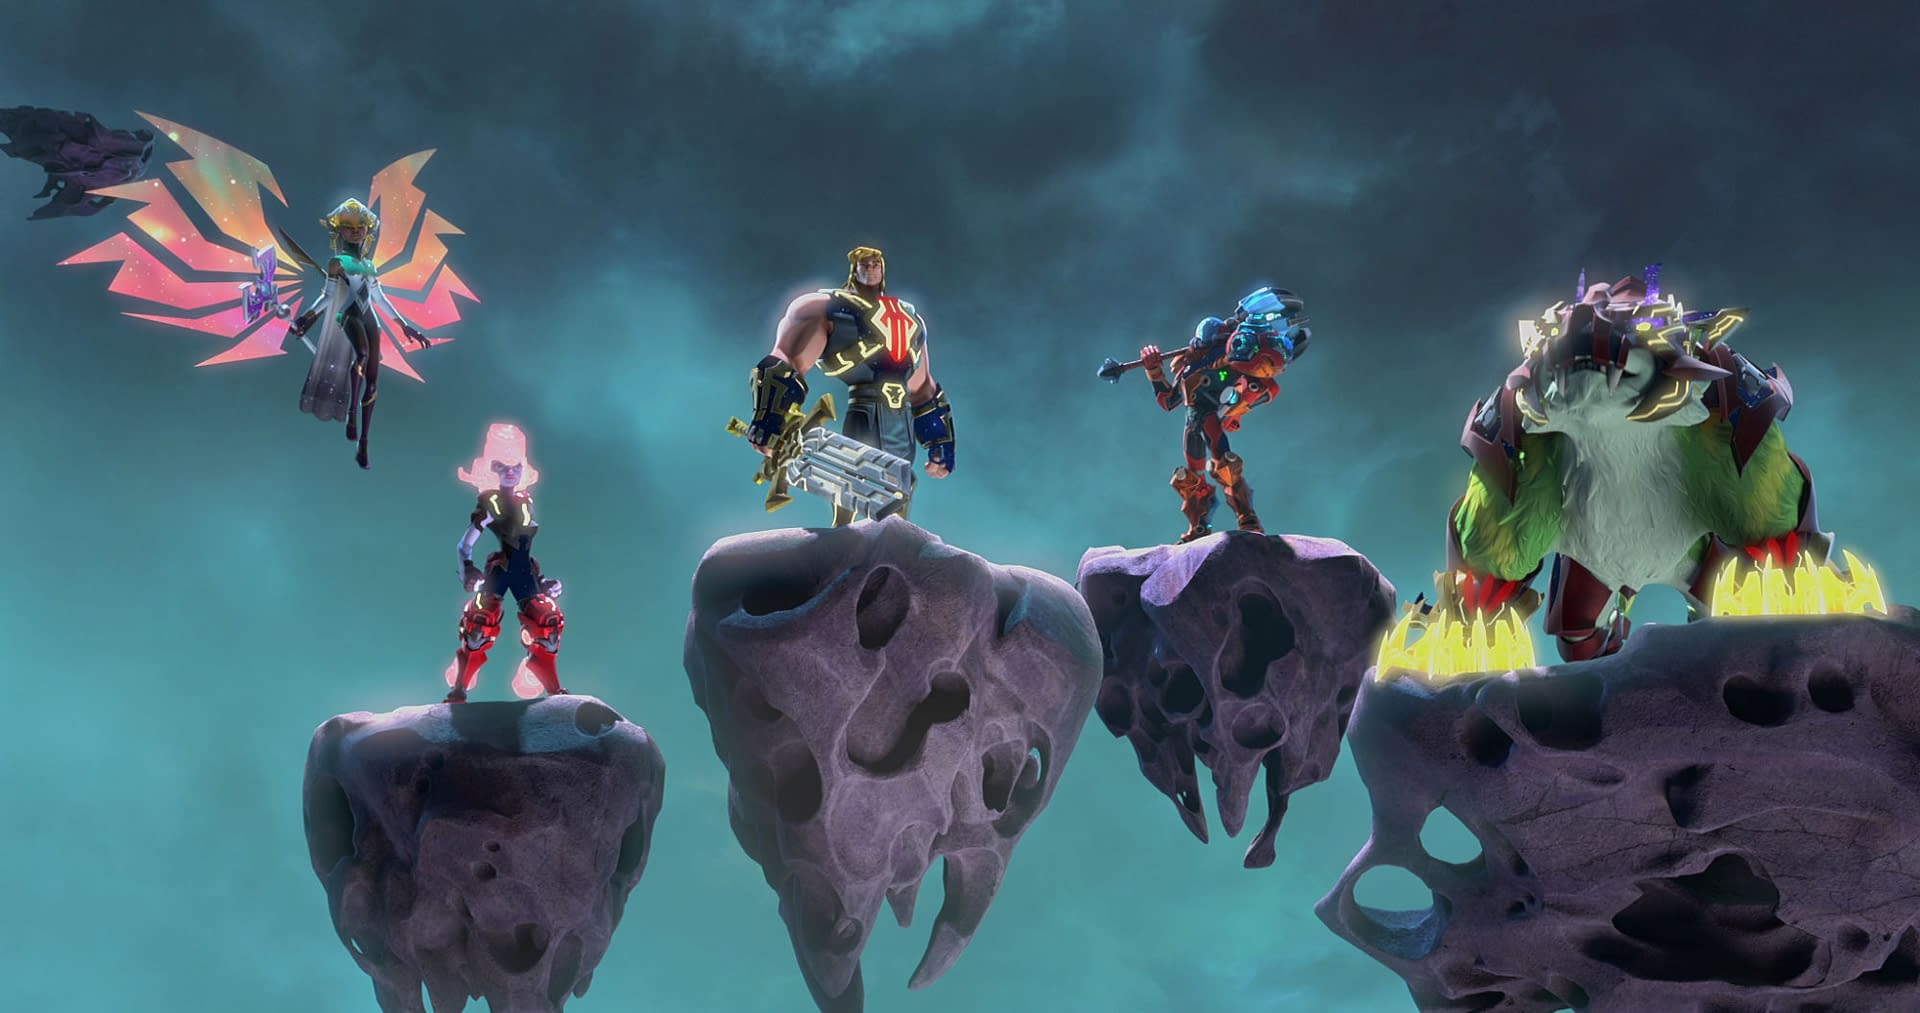 He-Man And The Masters Of The Universe Season 3 Trailer Is Here